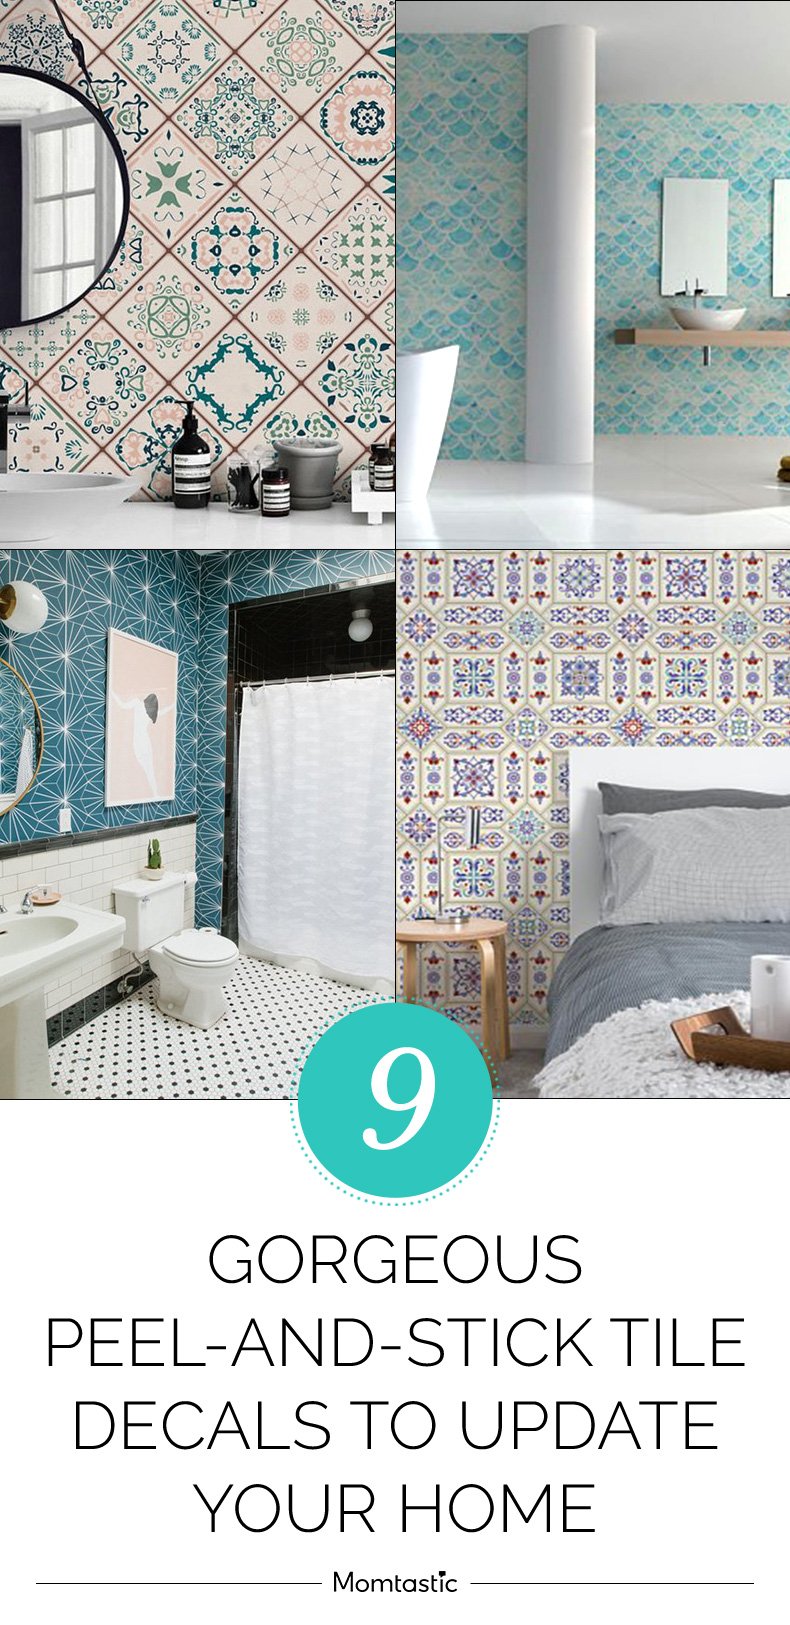 9 Gorgeous Peel-and-Stick Tile Decals to Update Your Home